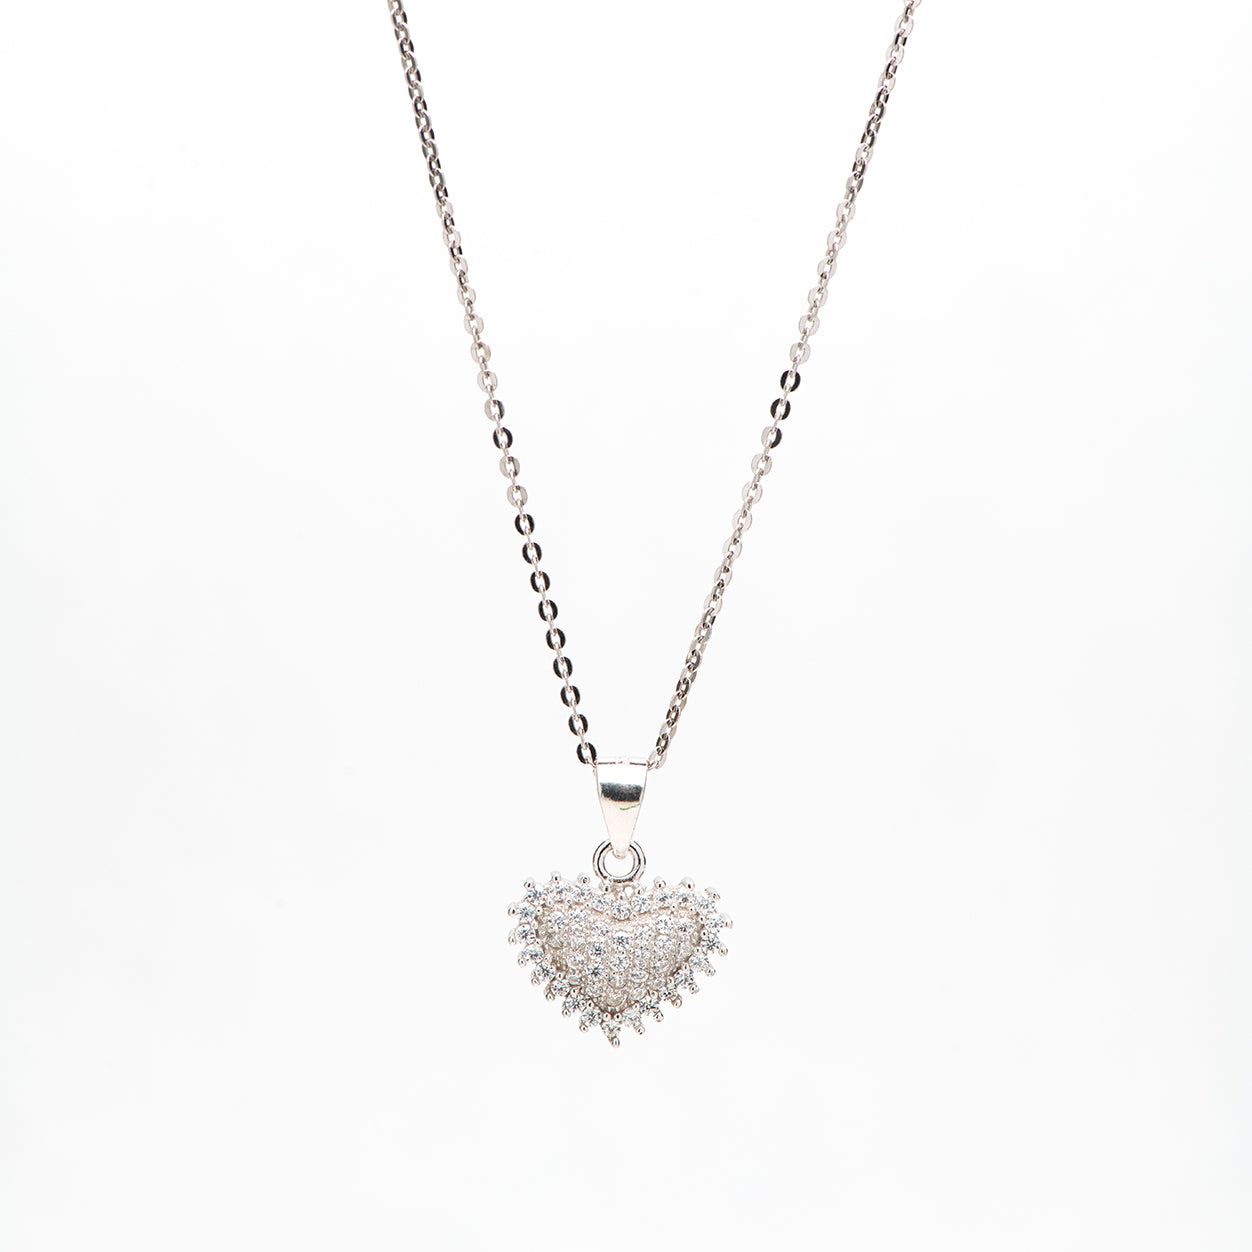 DK-925-462- small micropavé heart necklace